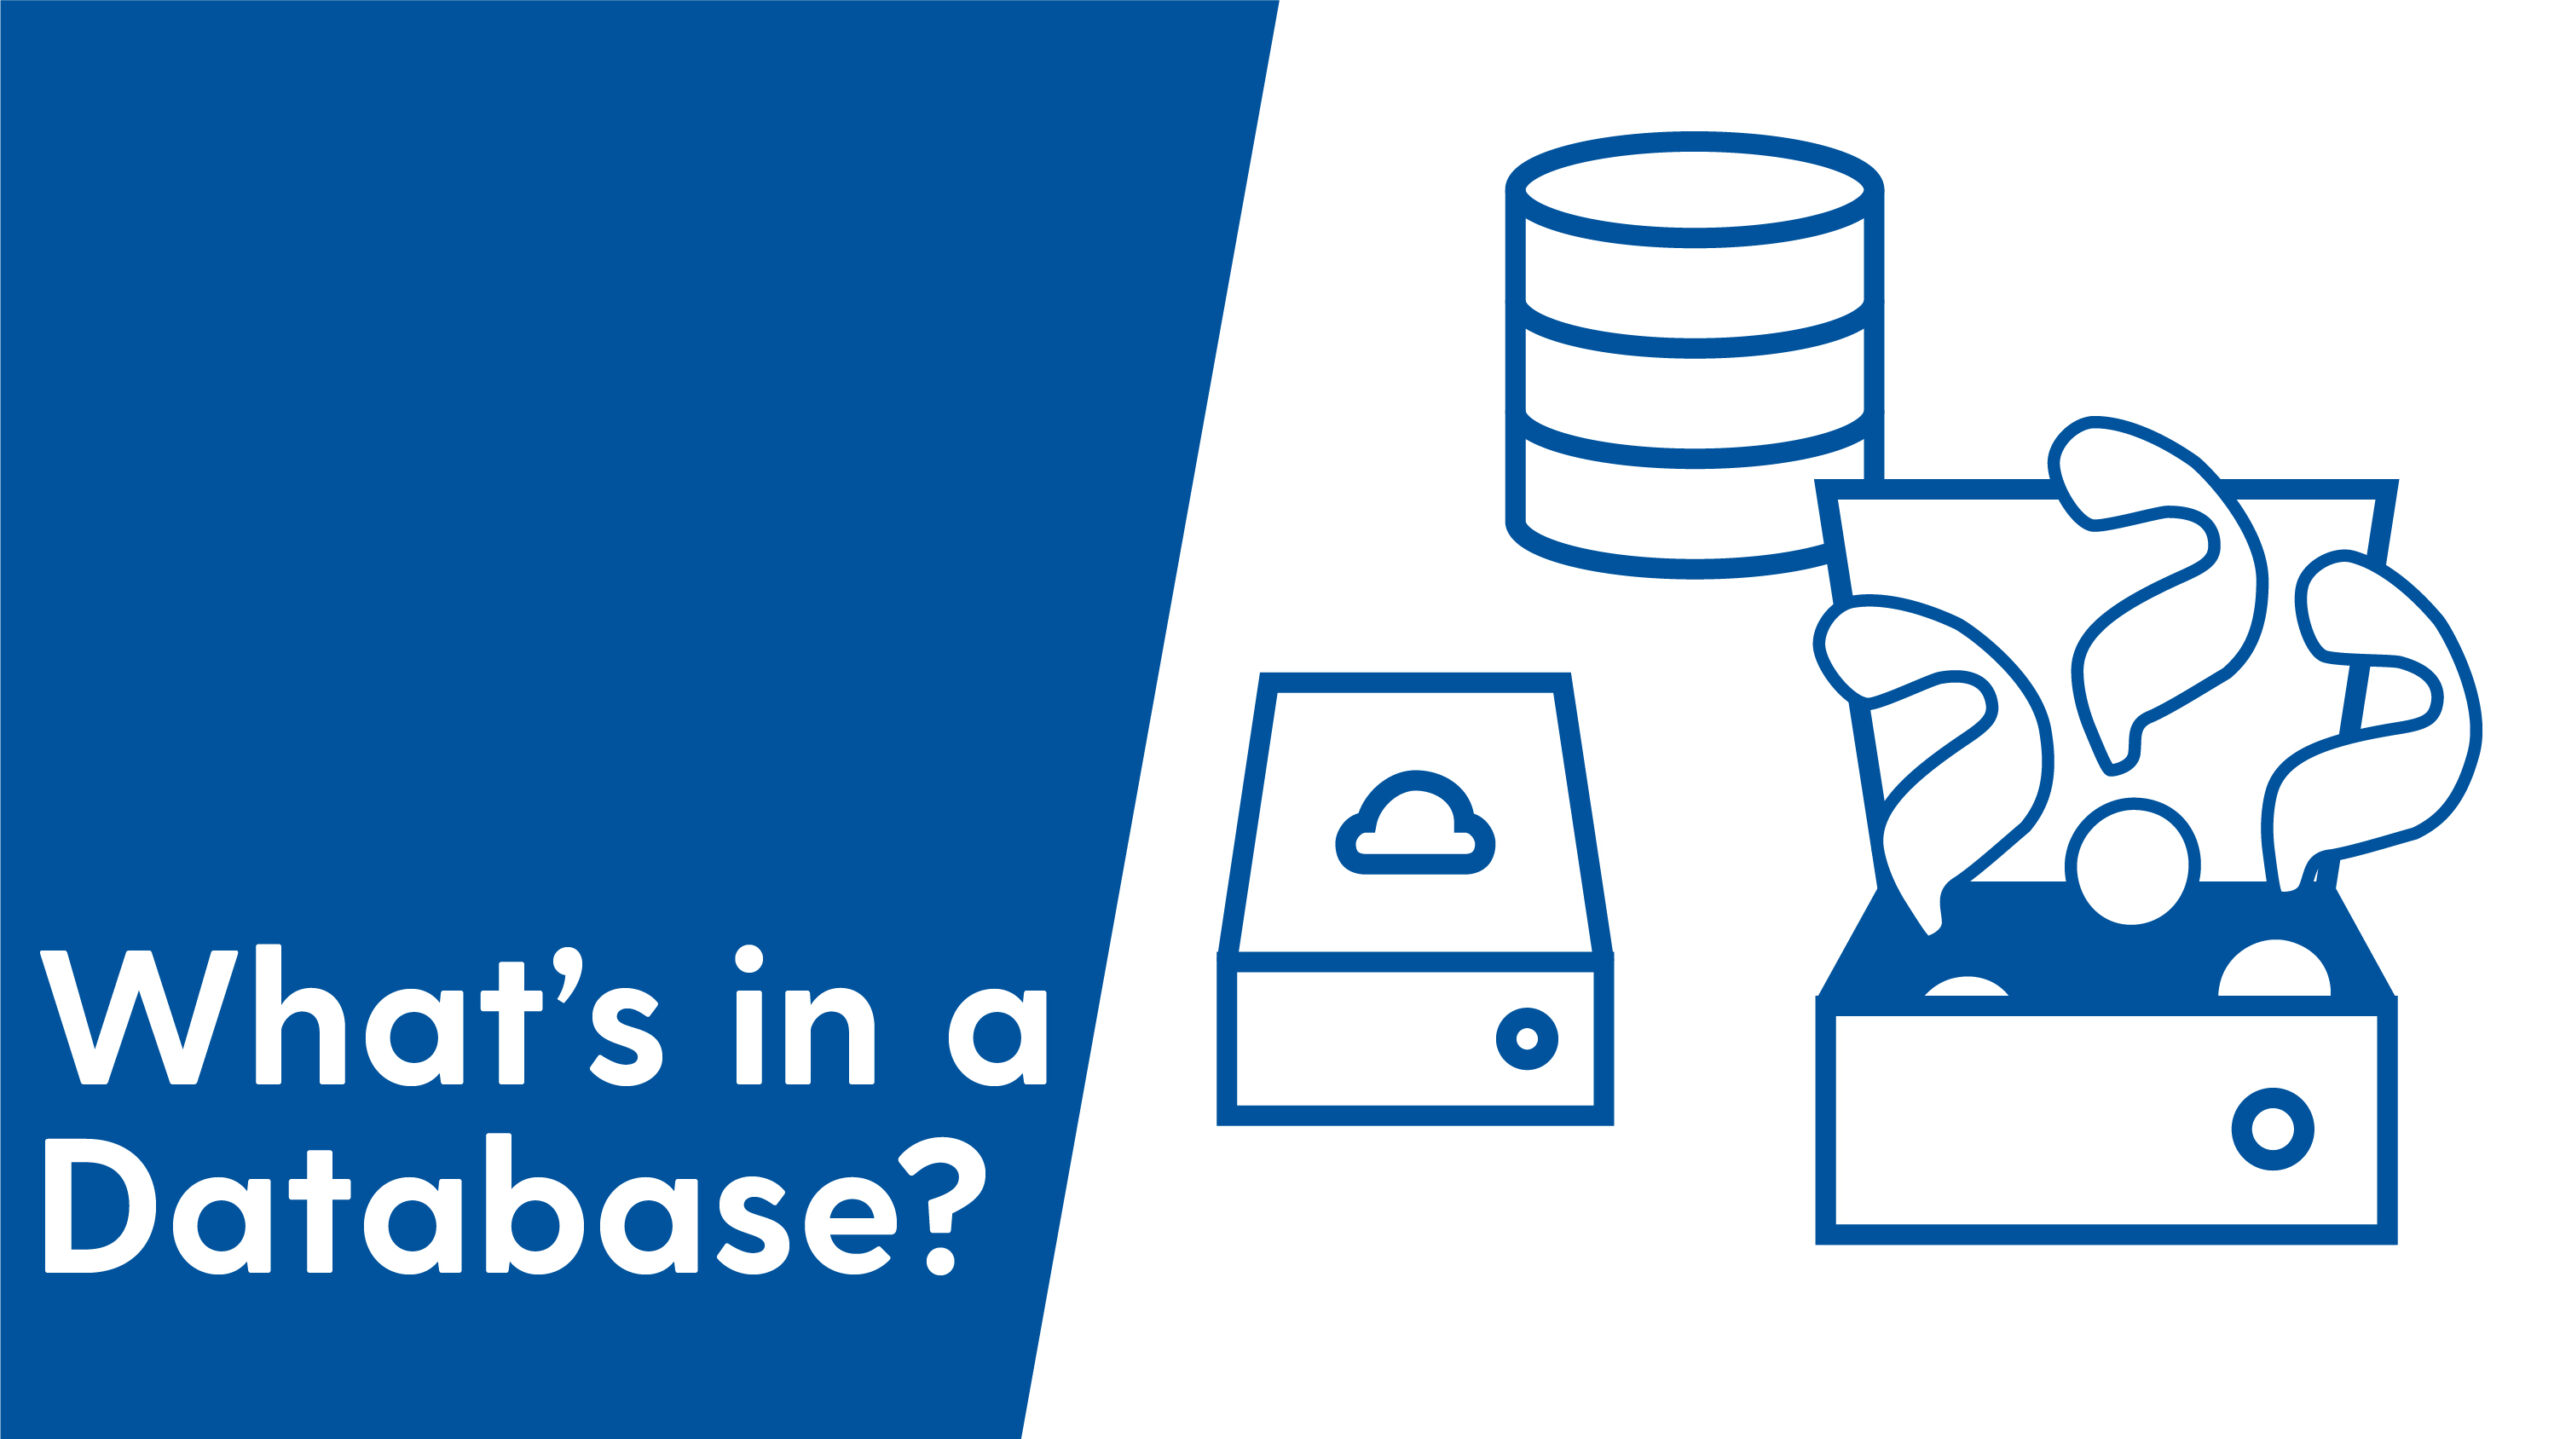 What's in a Database?